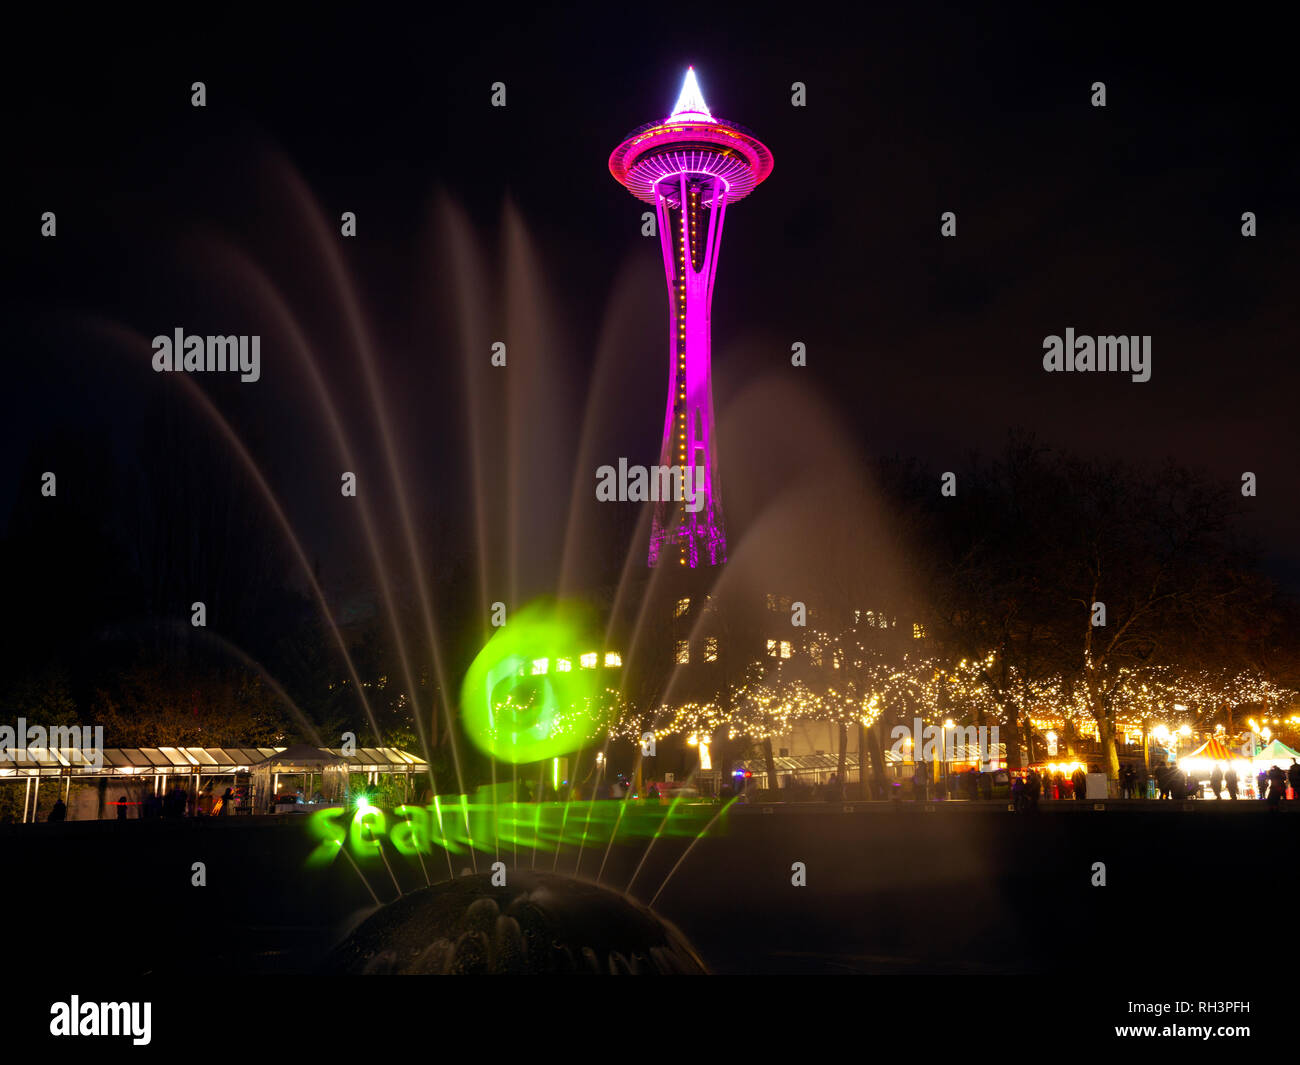 WA17057-00...WASHINGTON - The Seattle Space Needle with lights on for New Years 2018. Stock Photo